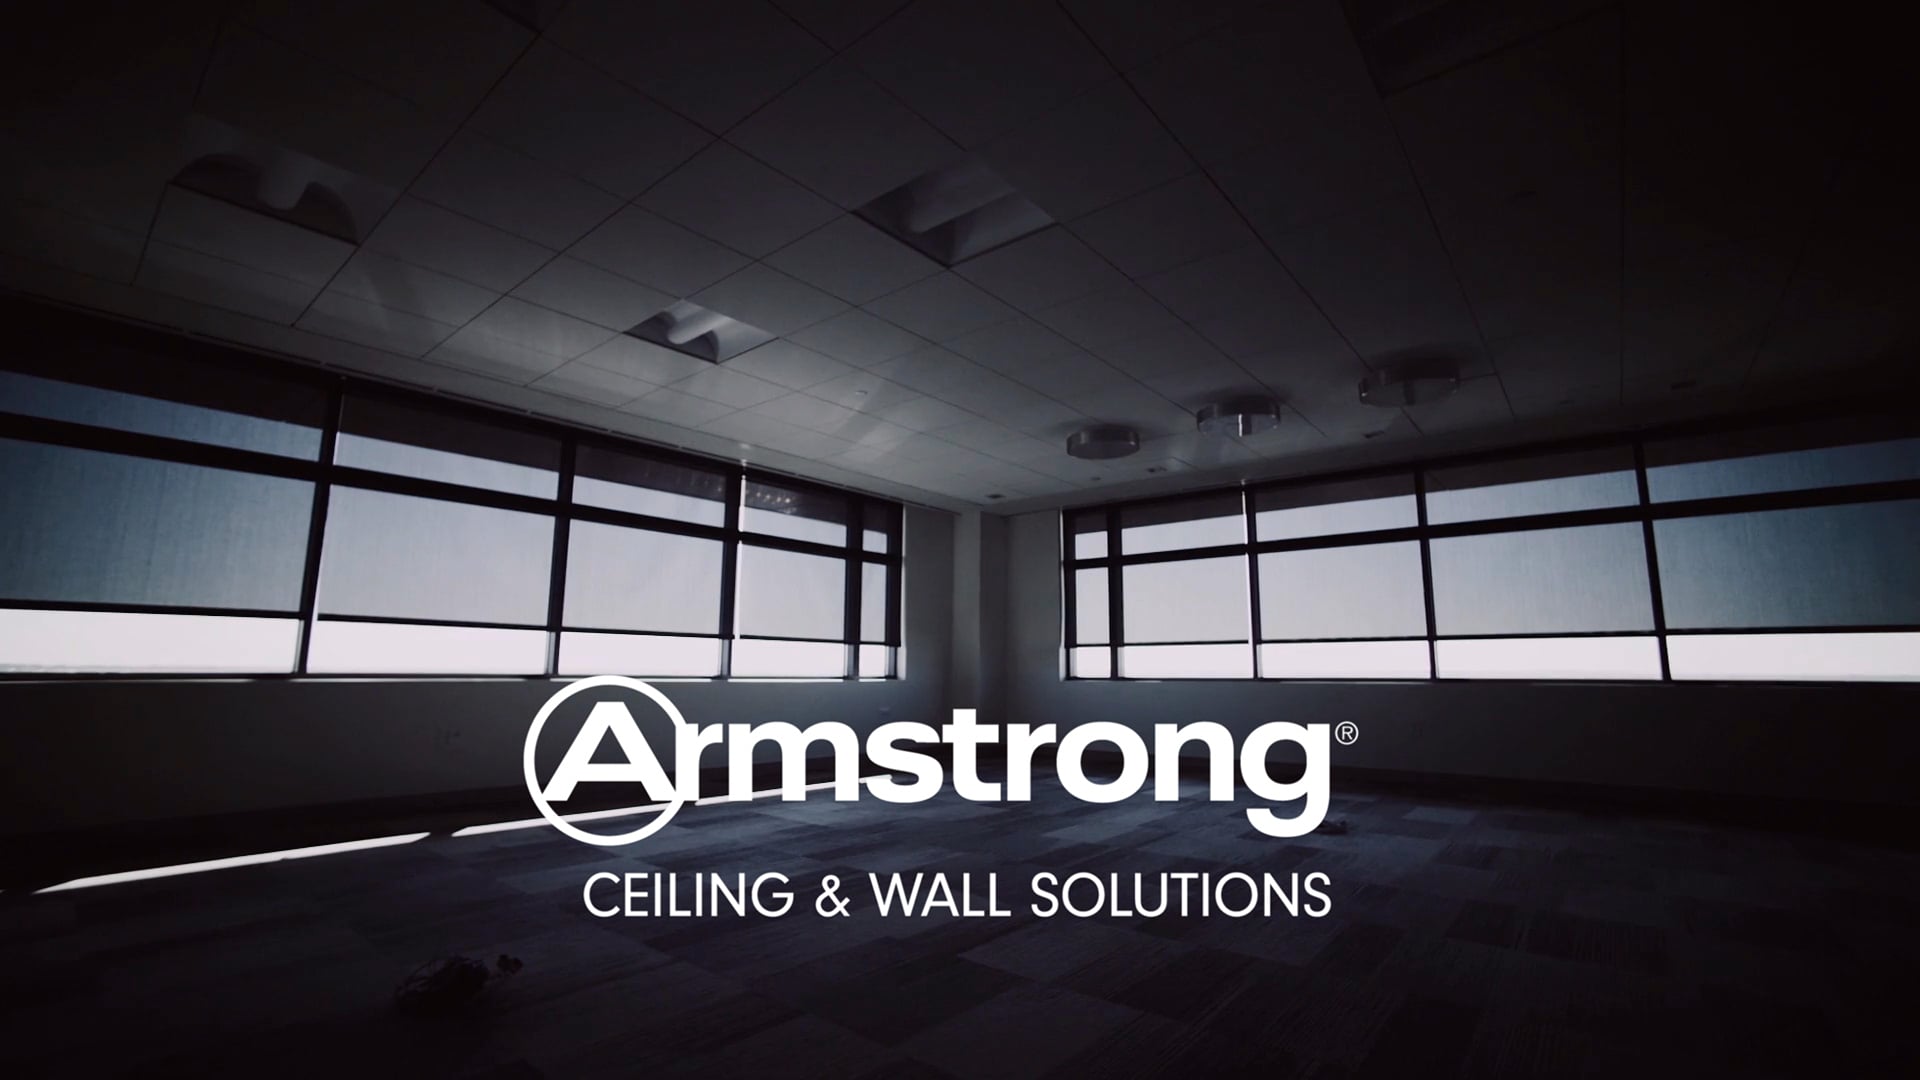 ARMSTRONG CEILING & WALL SOLUTIONS